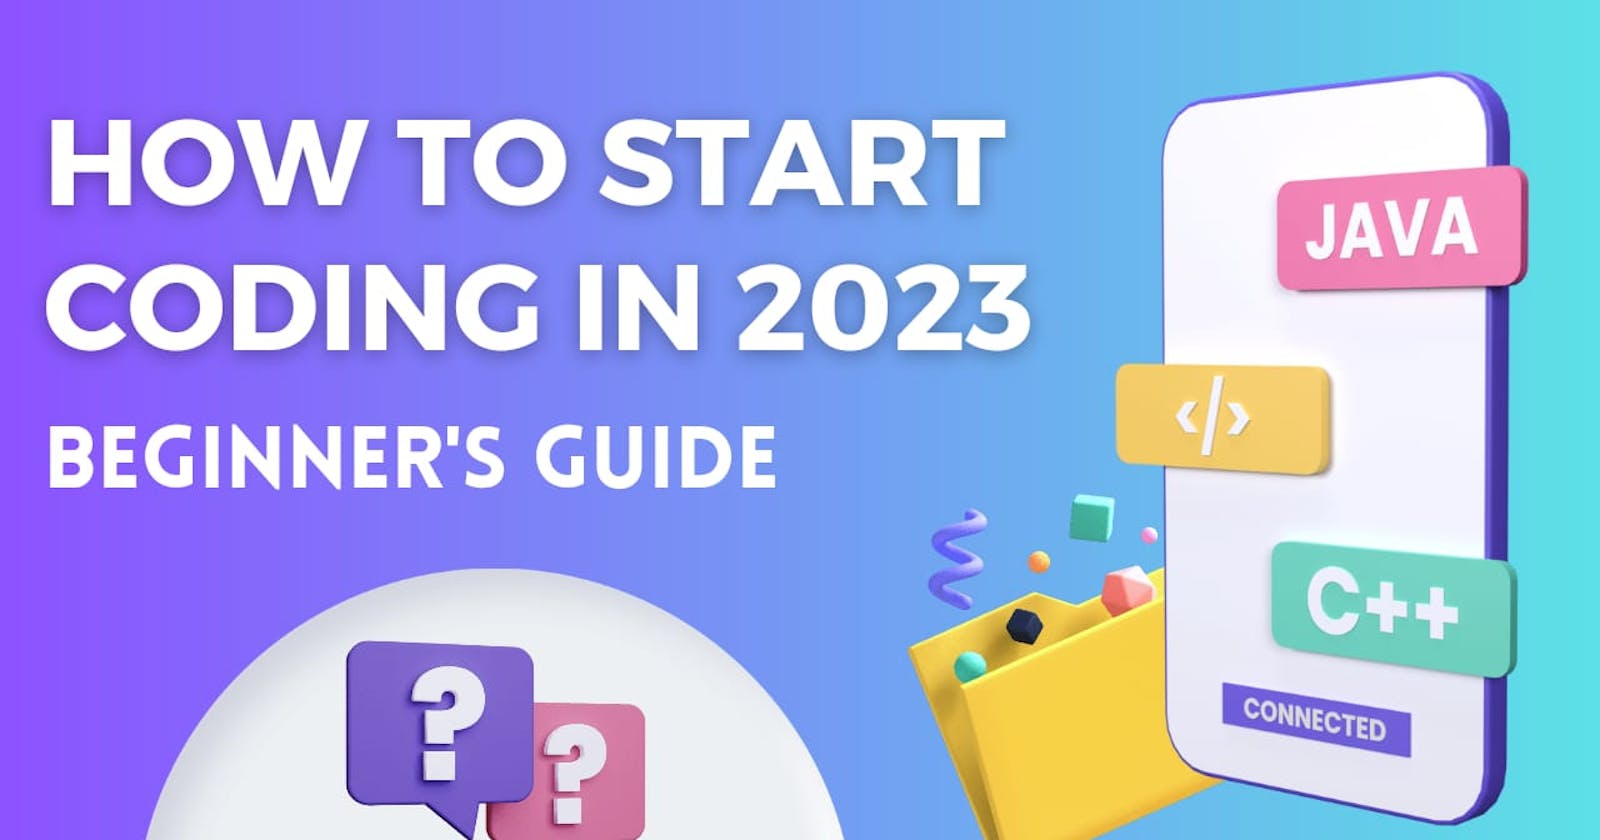 How to Start Coding in 2023?